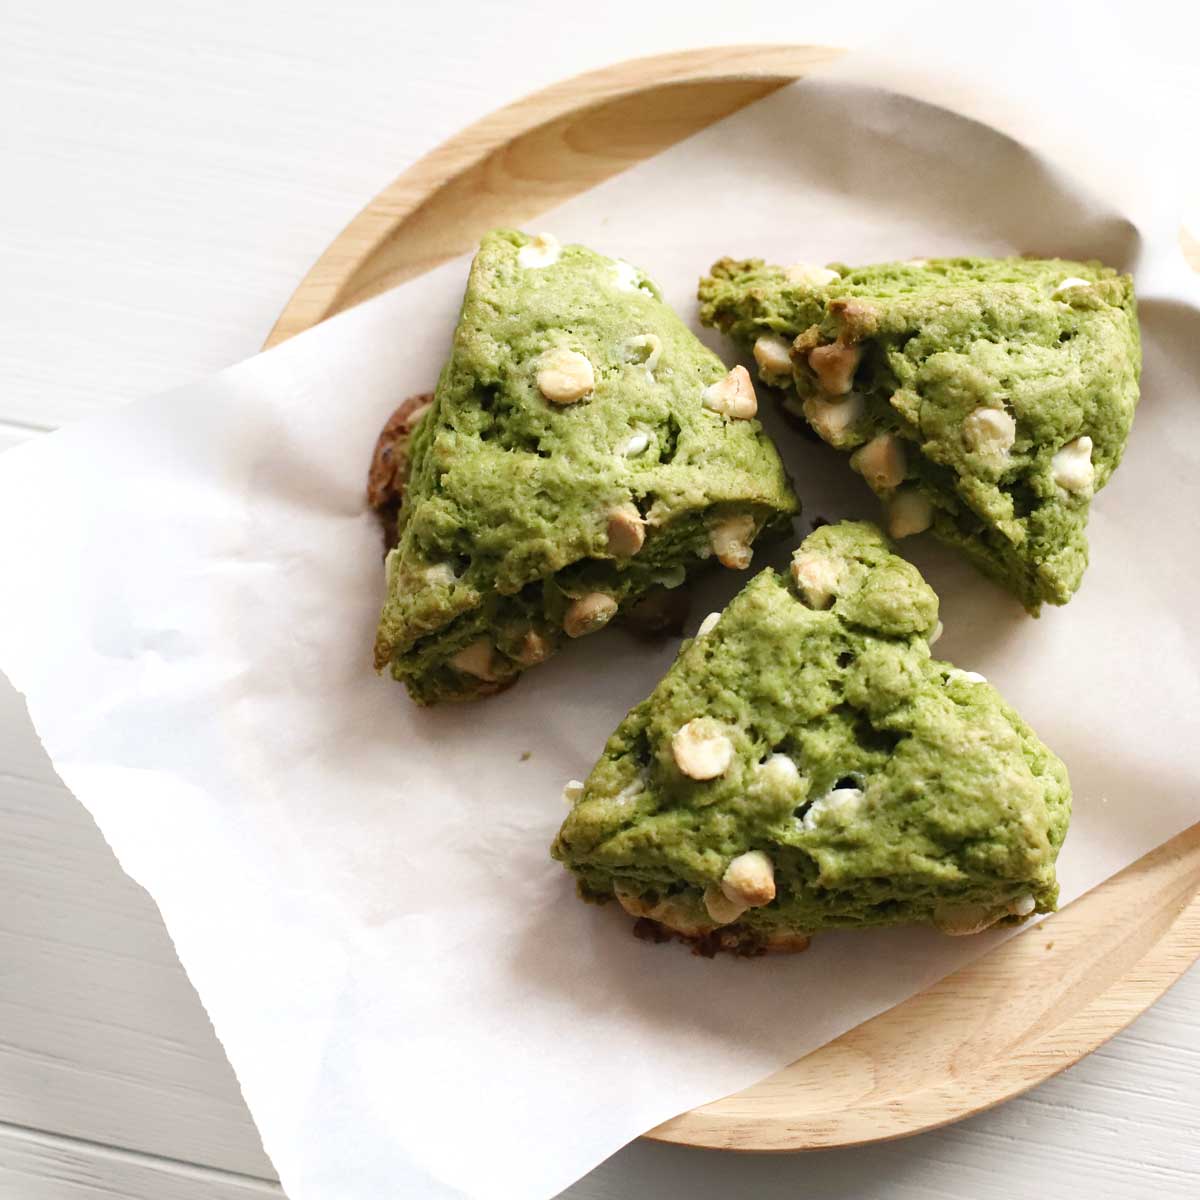 Homemade Matcha Scones with White Chocolate Chips (No Butter Required!) - Matcha Scones